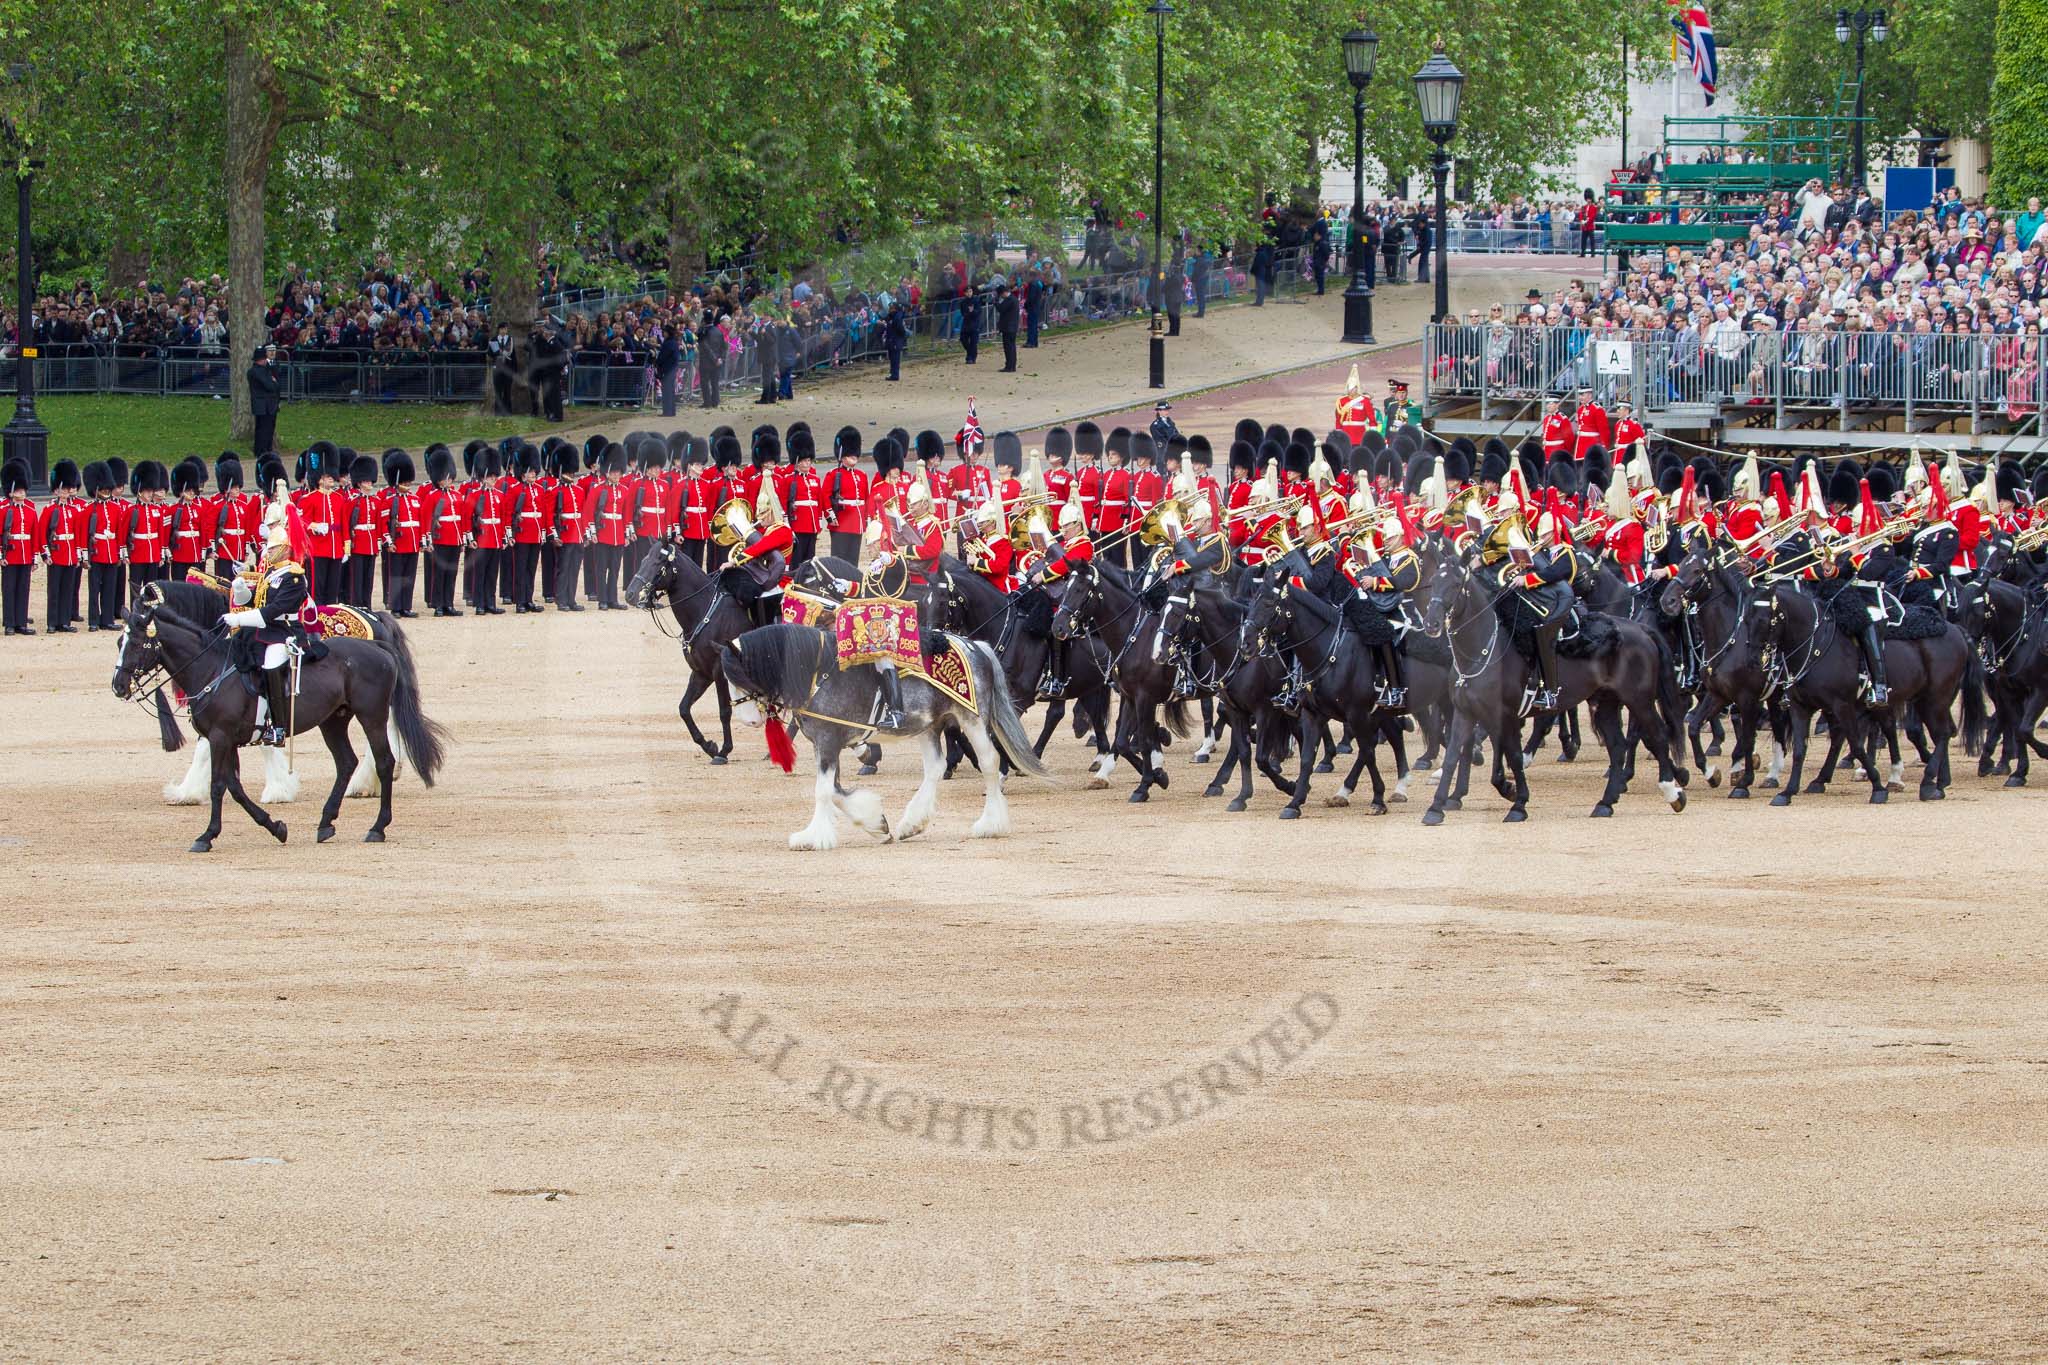 The Colonel's Review 2012: The Mounted Bands of the Household Cavalry start moving during the March Past..
Horse Guards Parade, Westminster,
London SW1,

United Kingdom,
on 09 June 2012 at 11:50, image #383